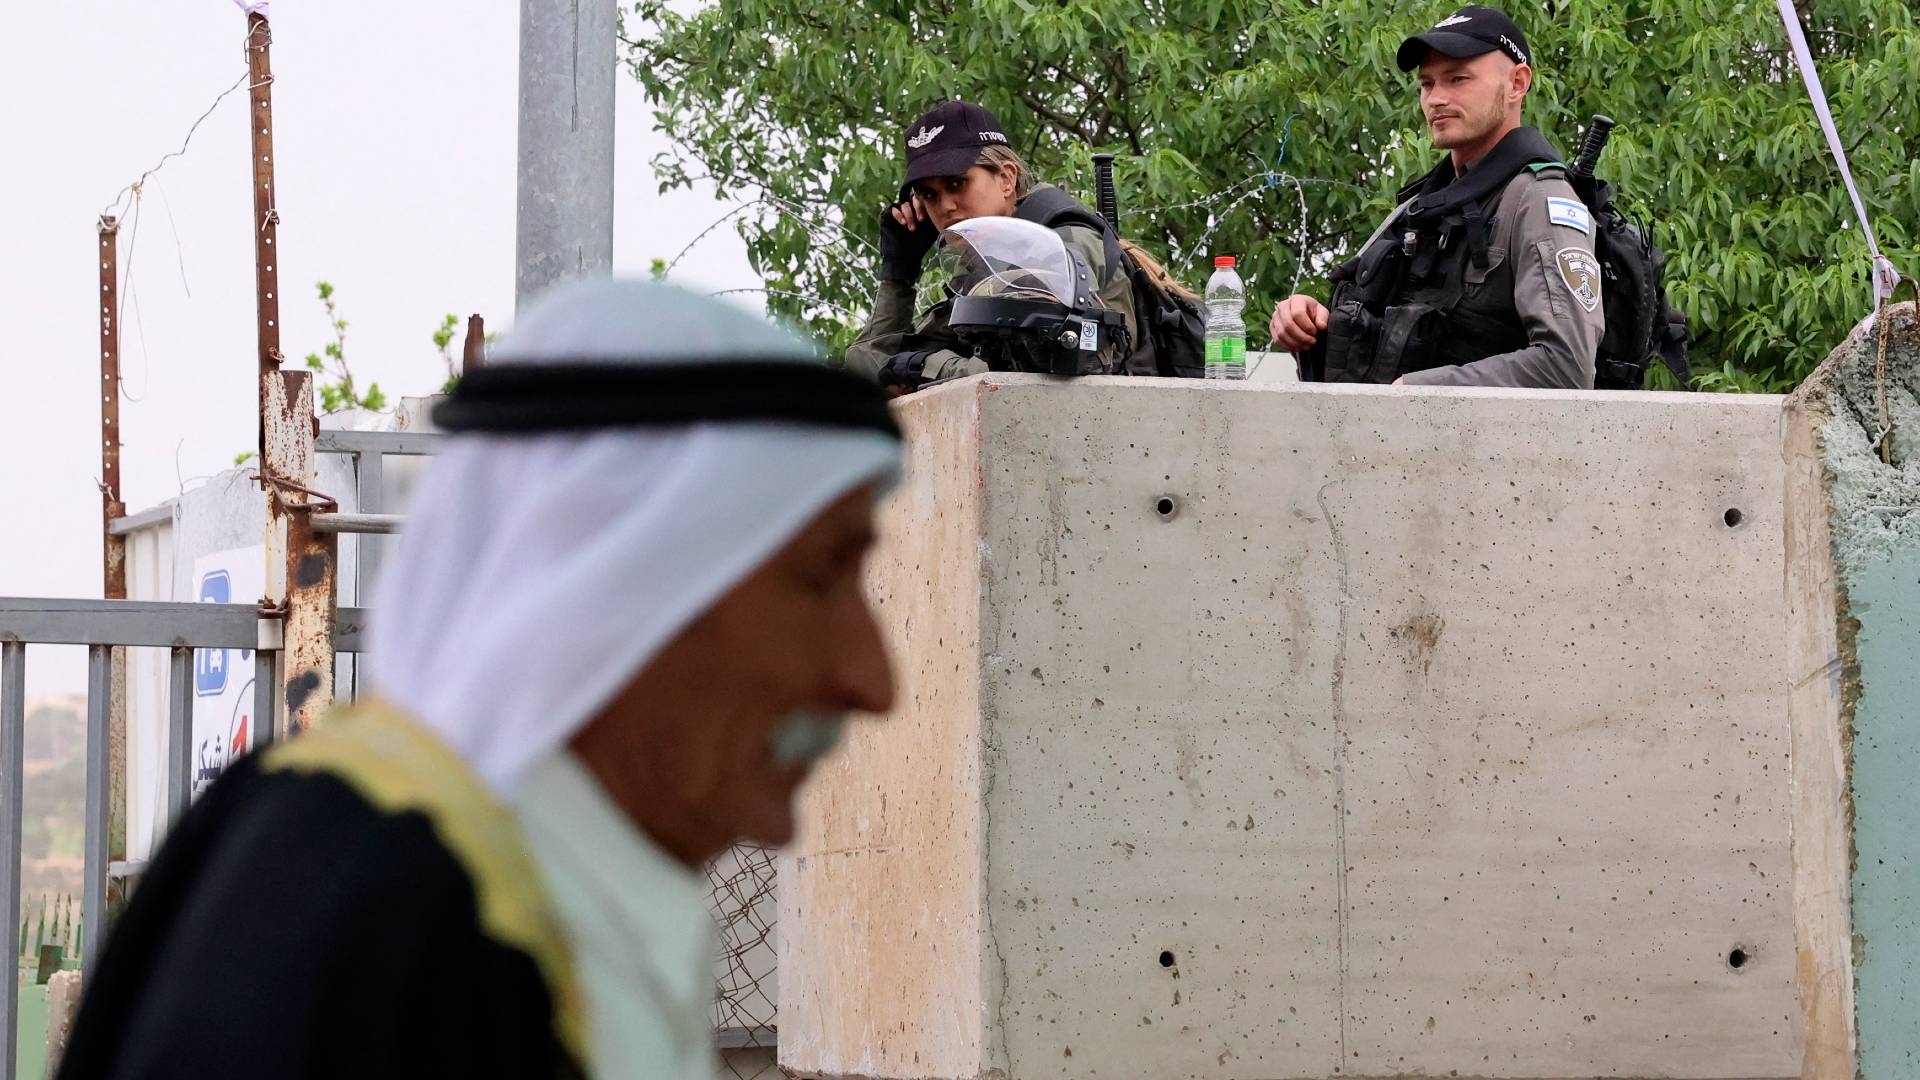 Israeli forces keep watch as Palestinians wait to have their IDs checked at a checkpoint in Bethlehem in the occupied West Bank on 8 April 2022.